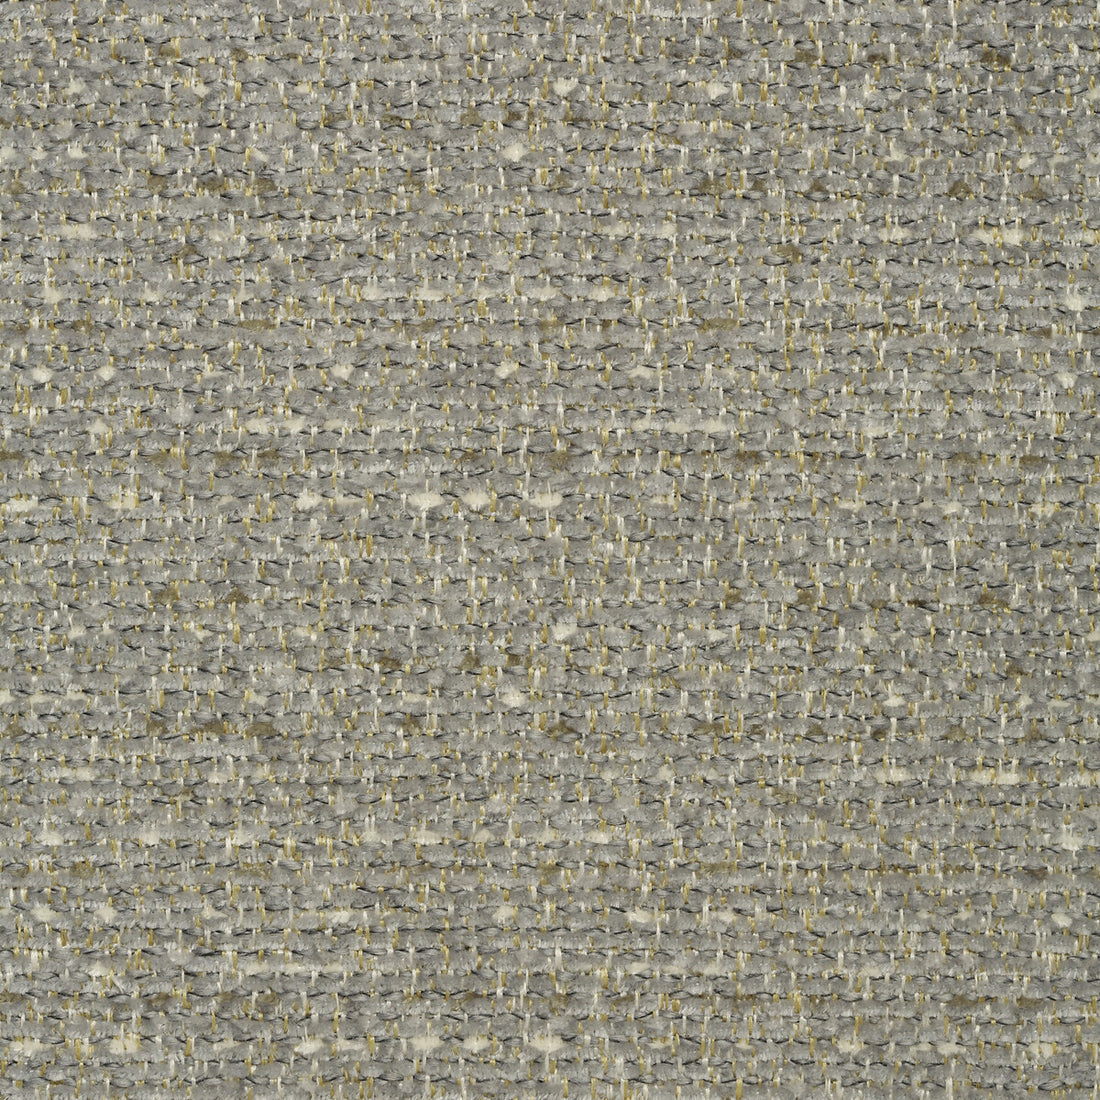 Kravet Contract fabric in 35118-11 color - pattern 35118.11.0 - by Kravet Contract in the Crypton Incase collection